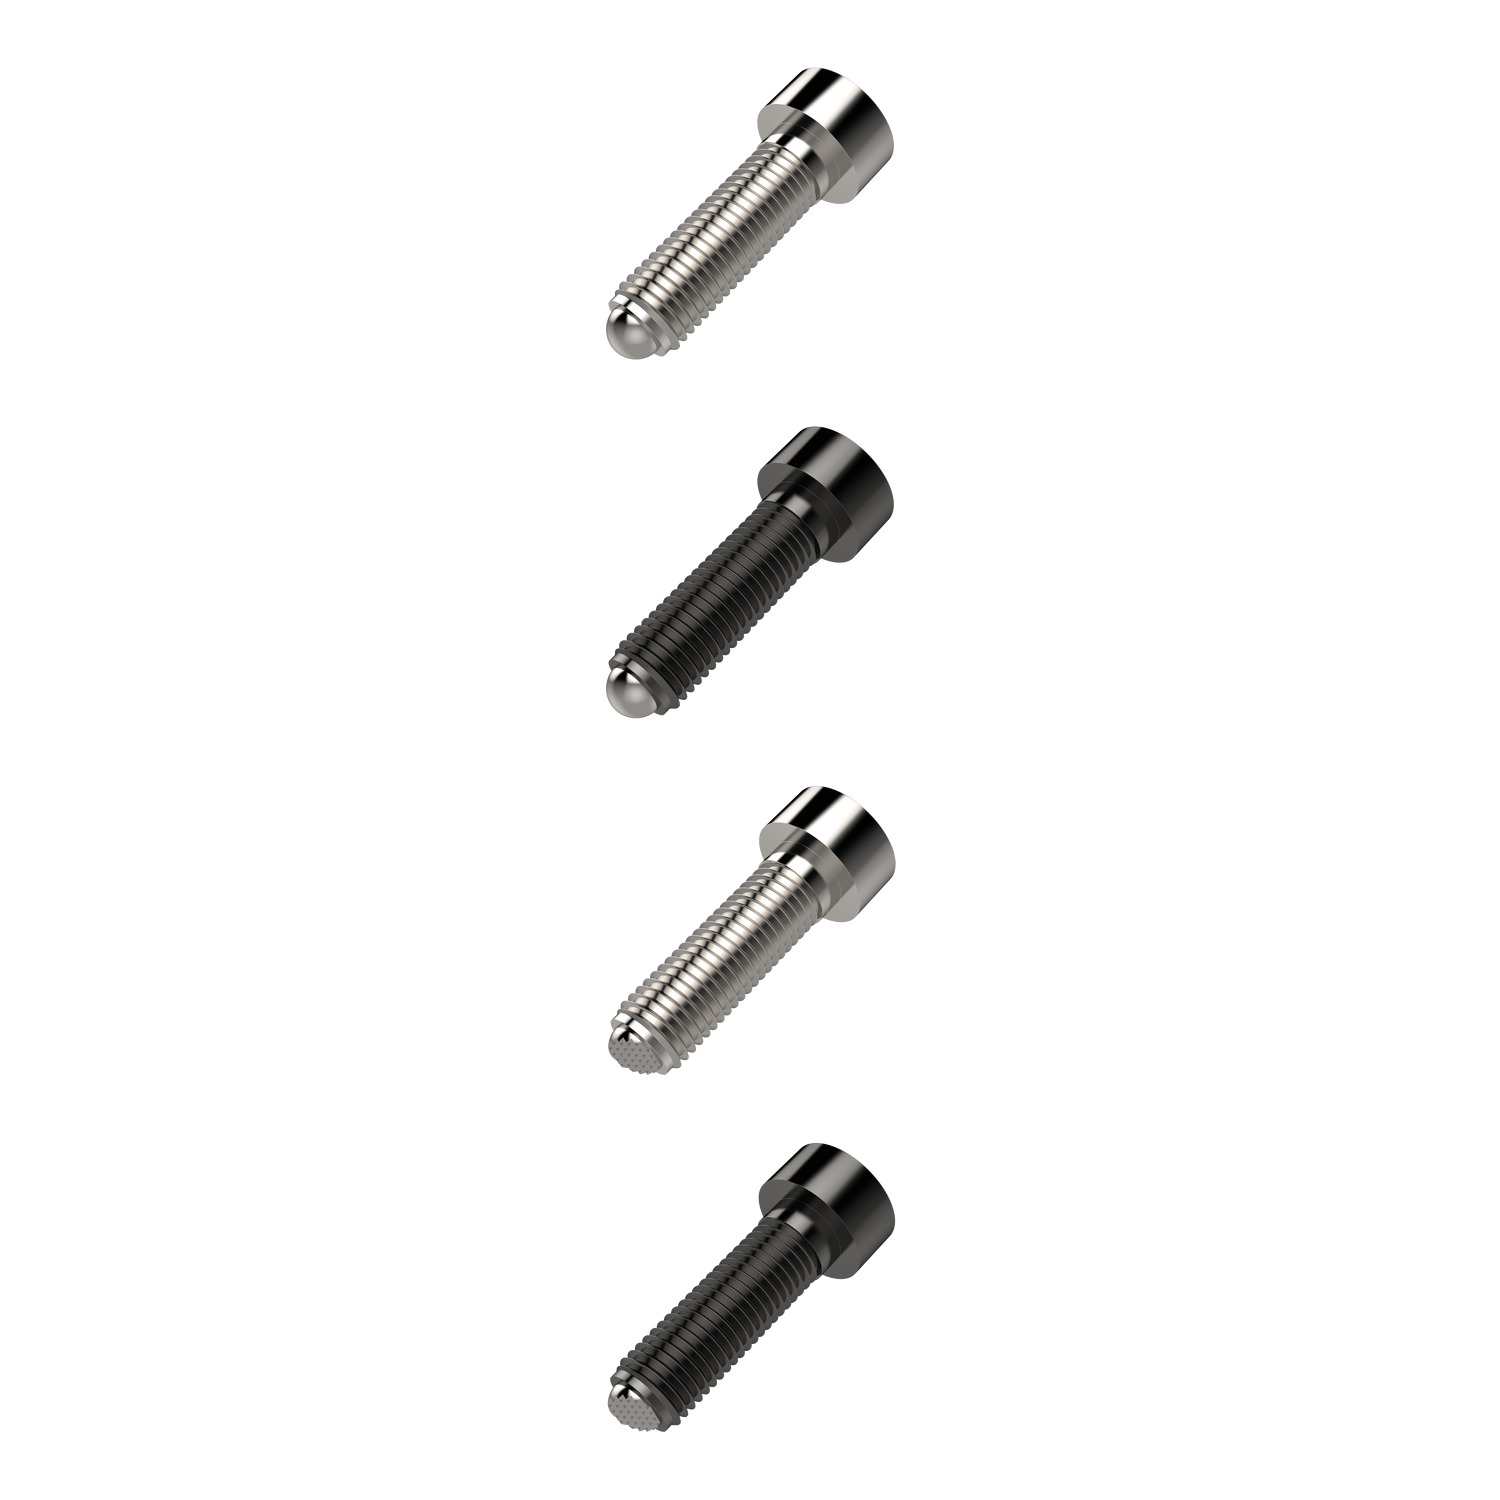 Product 34020, Thrust Screws - Headed ball ended - metal / 